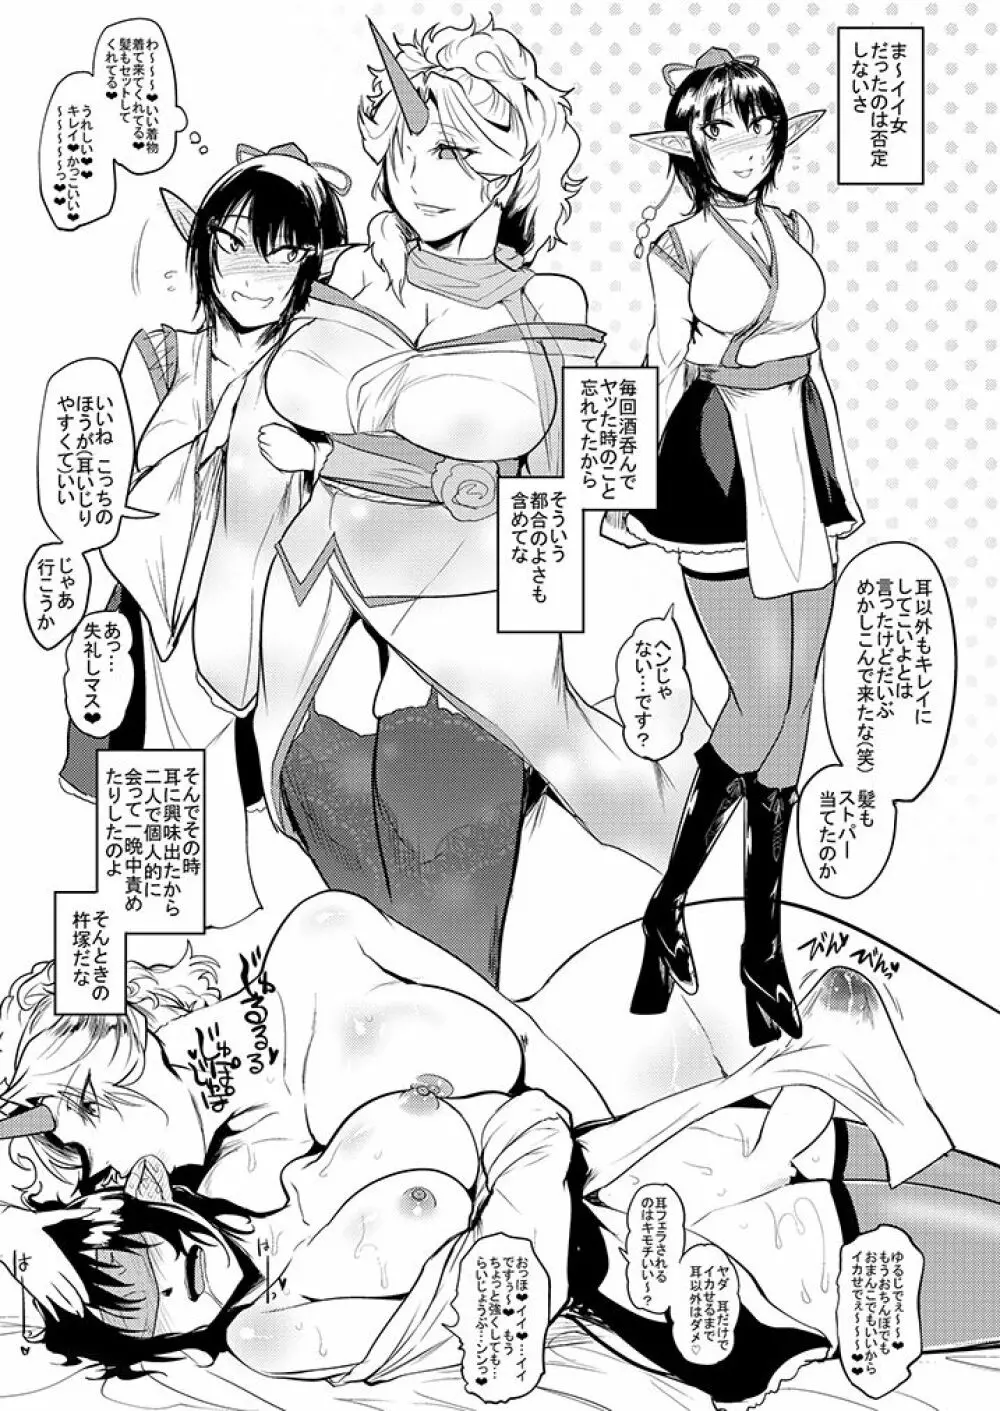 SAKUYA MAID in HEAVEN/ALL IN 1 - page491